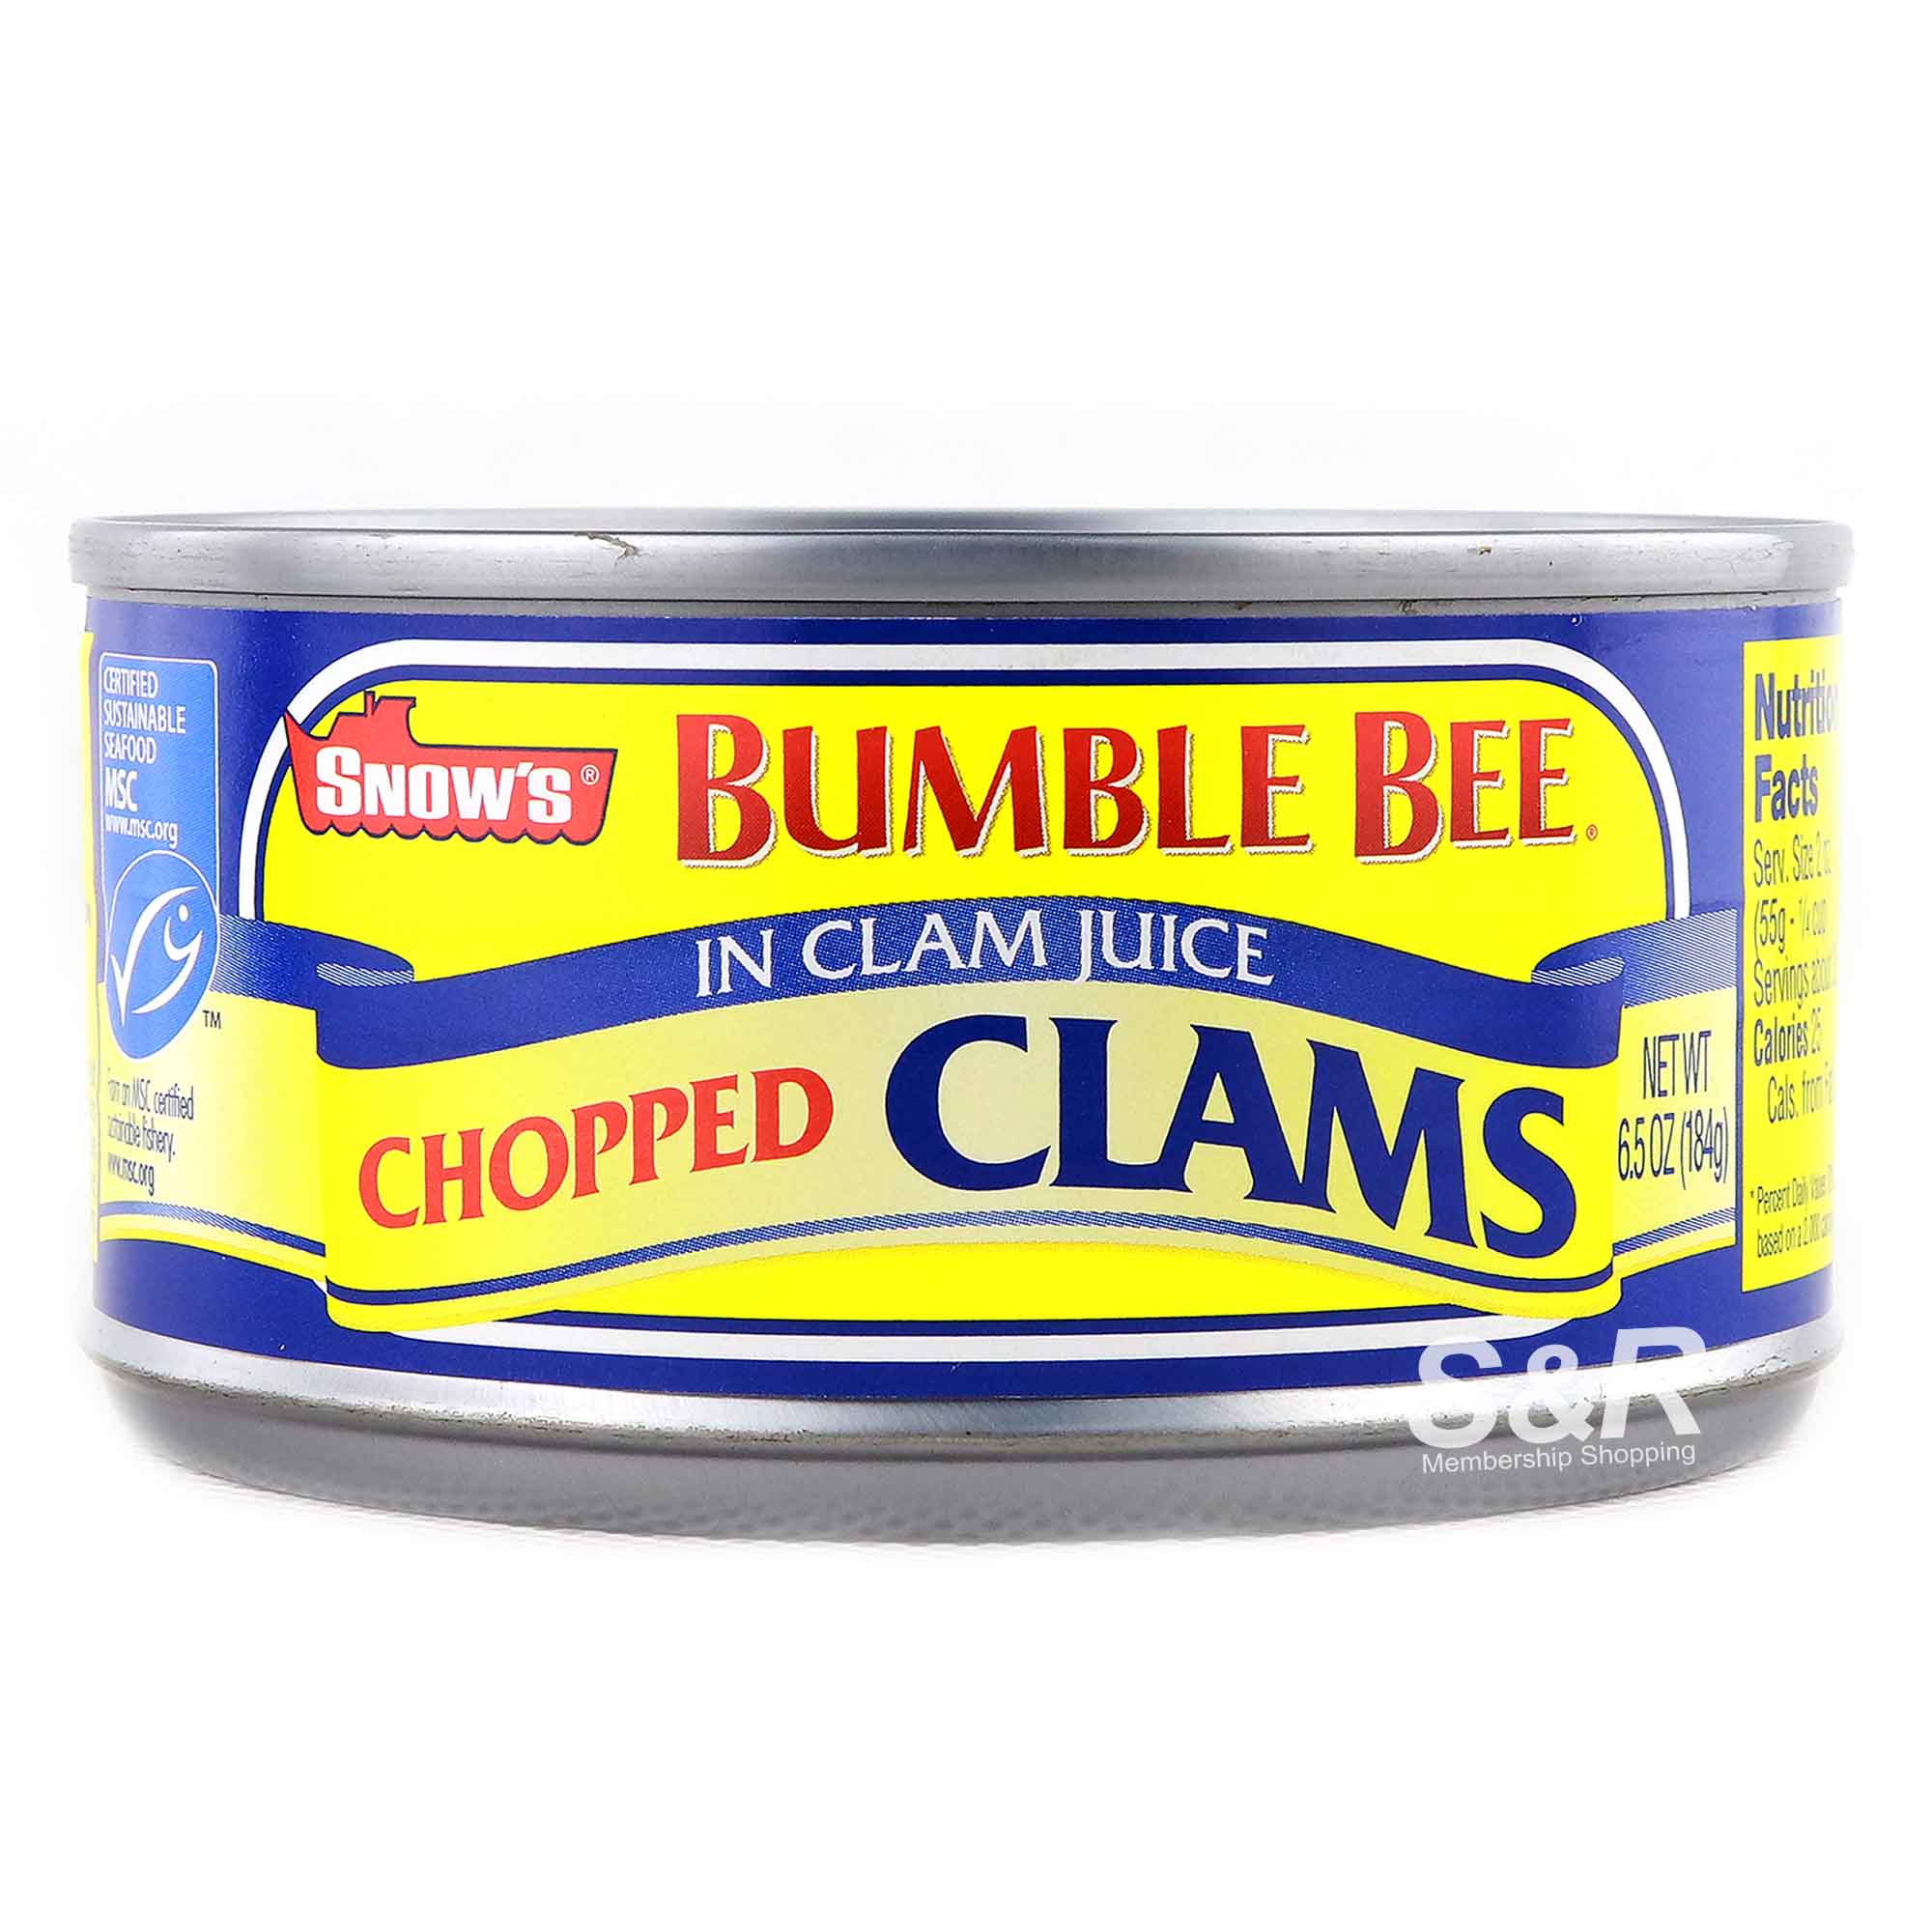 Snow's Bumble Bee Chopped Clams in Clam Juice 184g